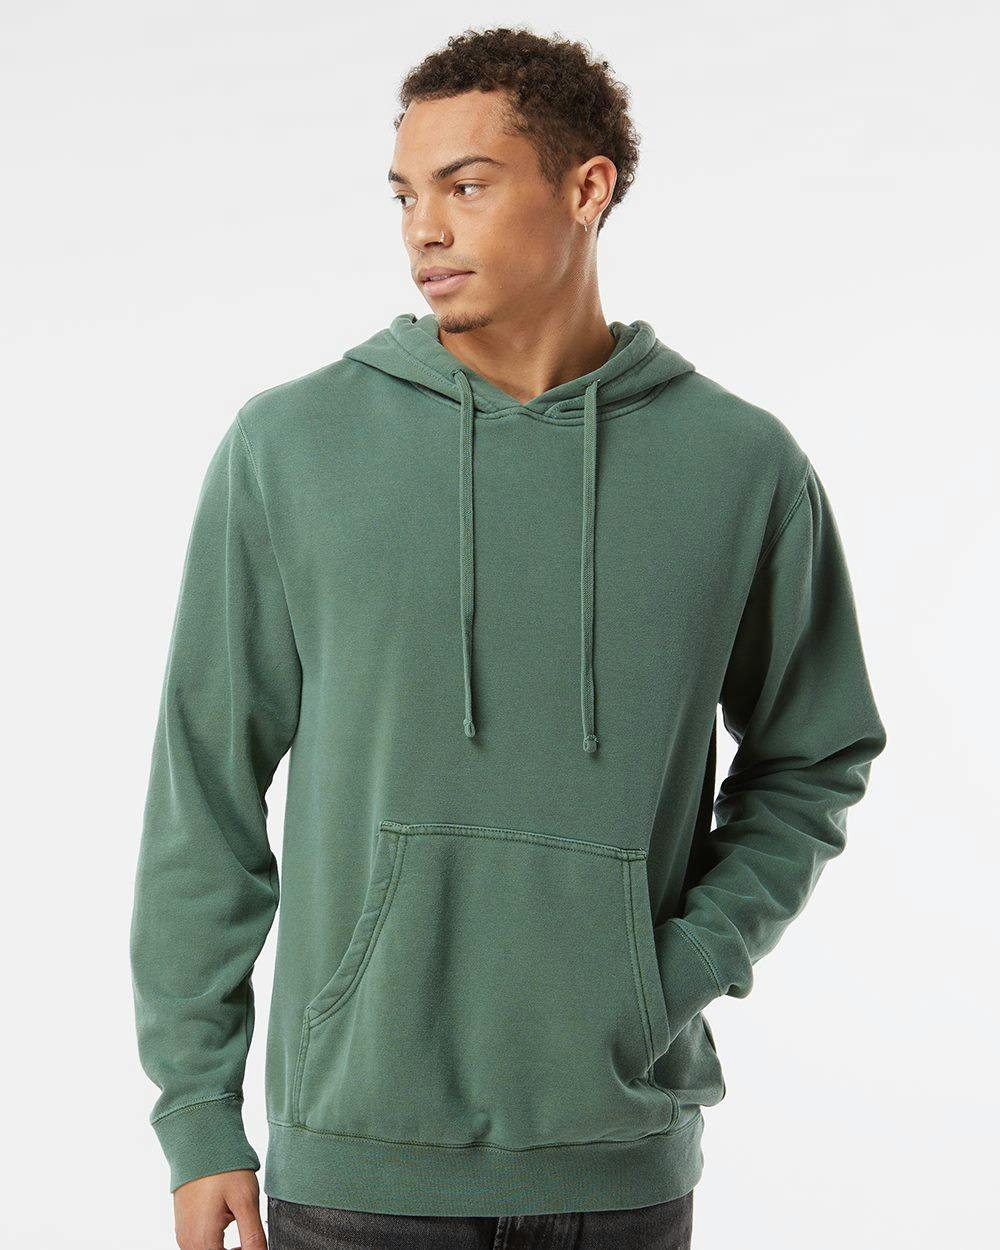 Image for Midweight Pigment-Dyed Hooded Sweatshirt - PRM4500